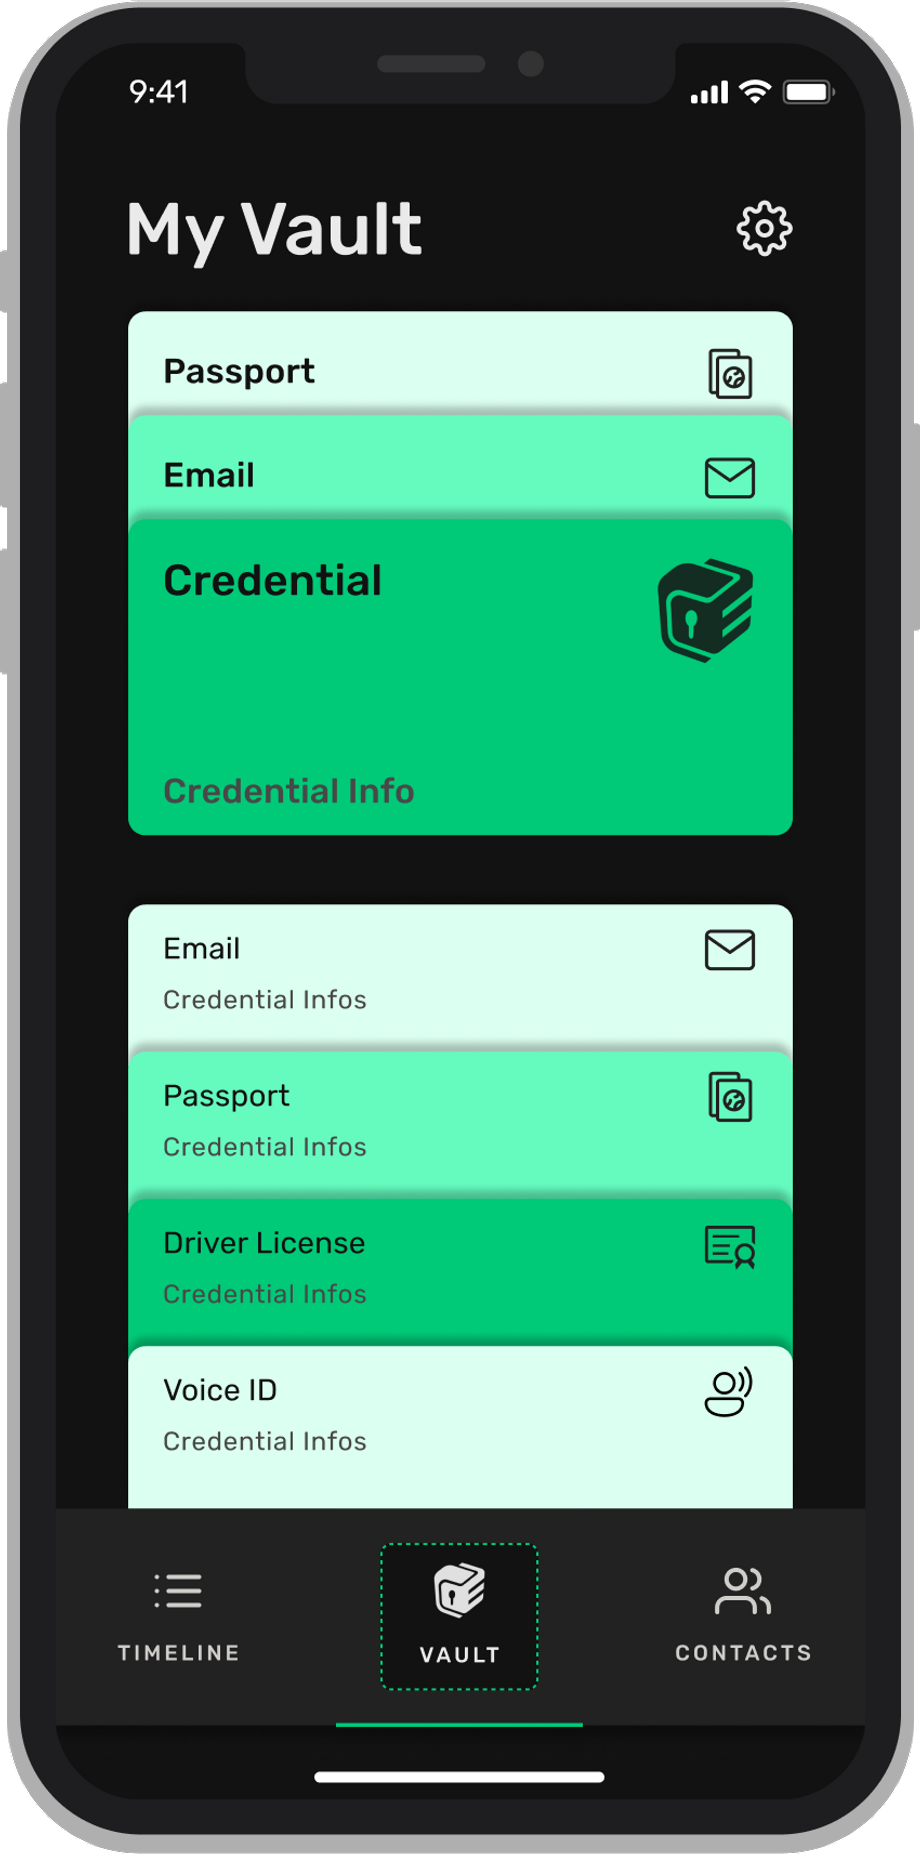 A cellphone screen showing the ID Crypt Vault with all user documents